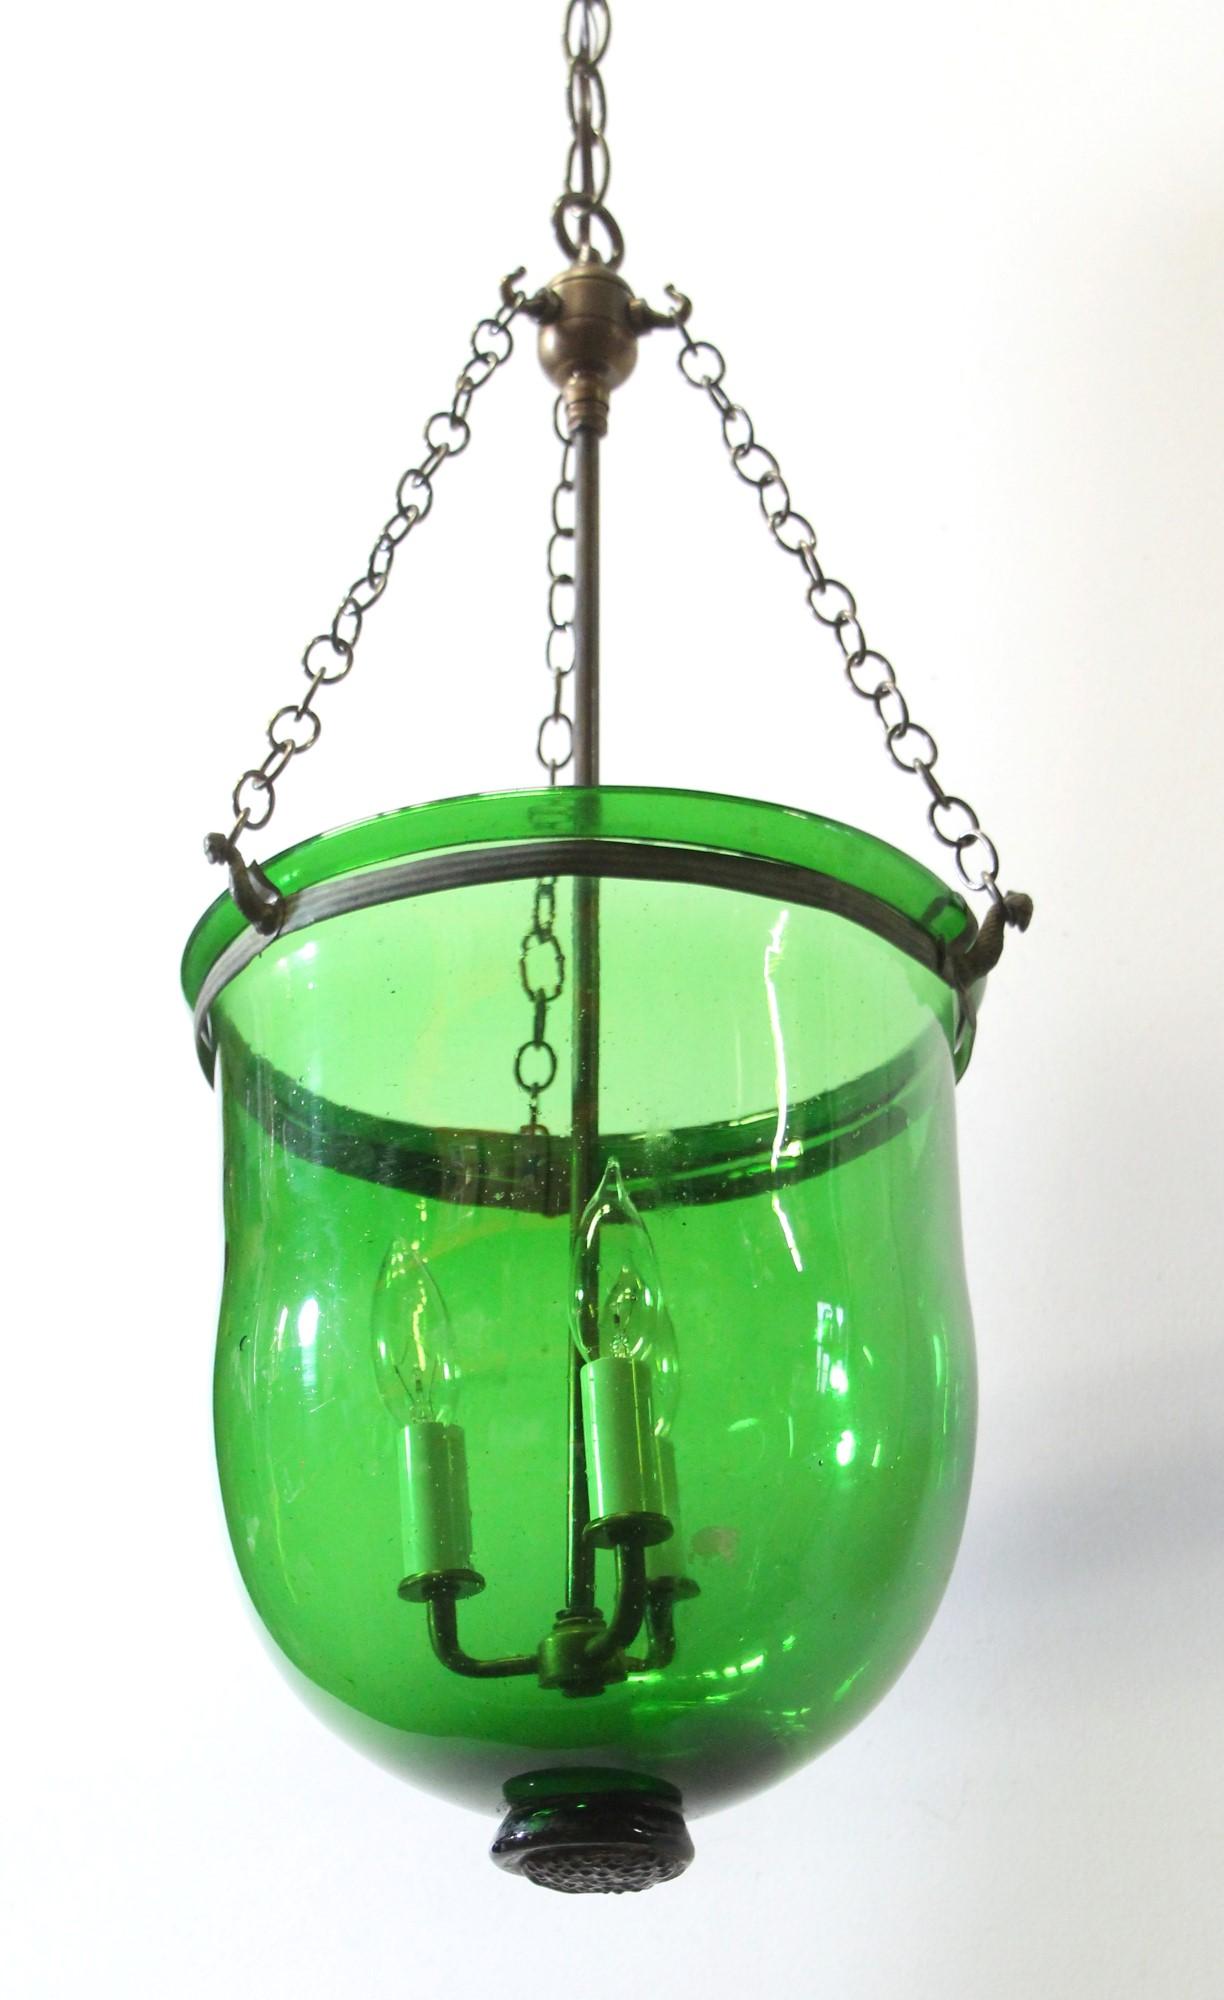 Original European antique hand blown glass bell jar pendant light with a deep green color and new brass hardware. and wiring This can be seen at our 400 Gilligan St location in Scranton, PA.